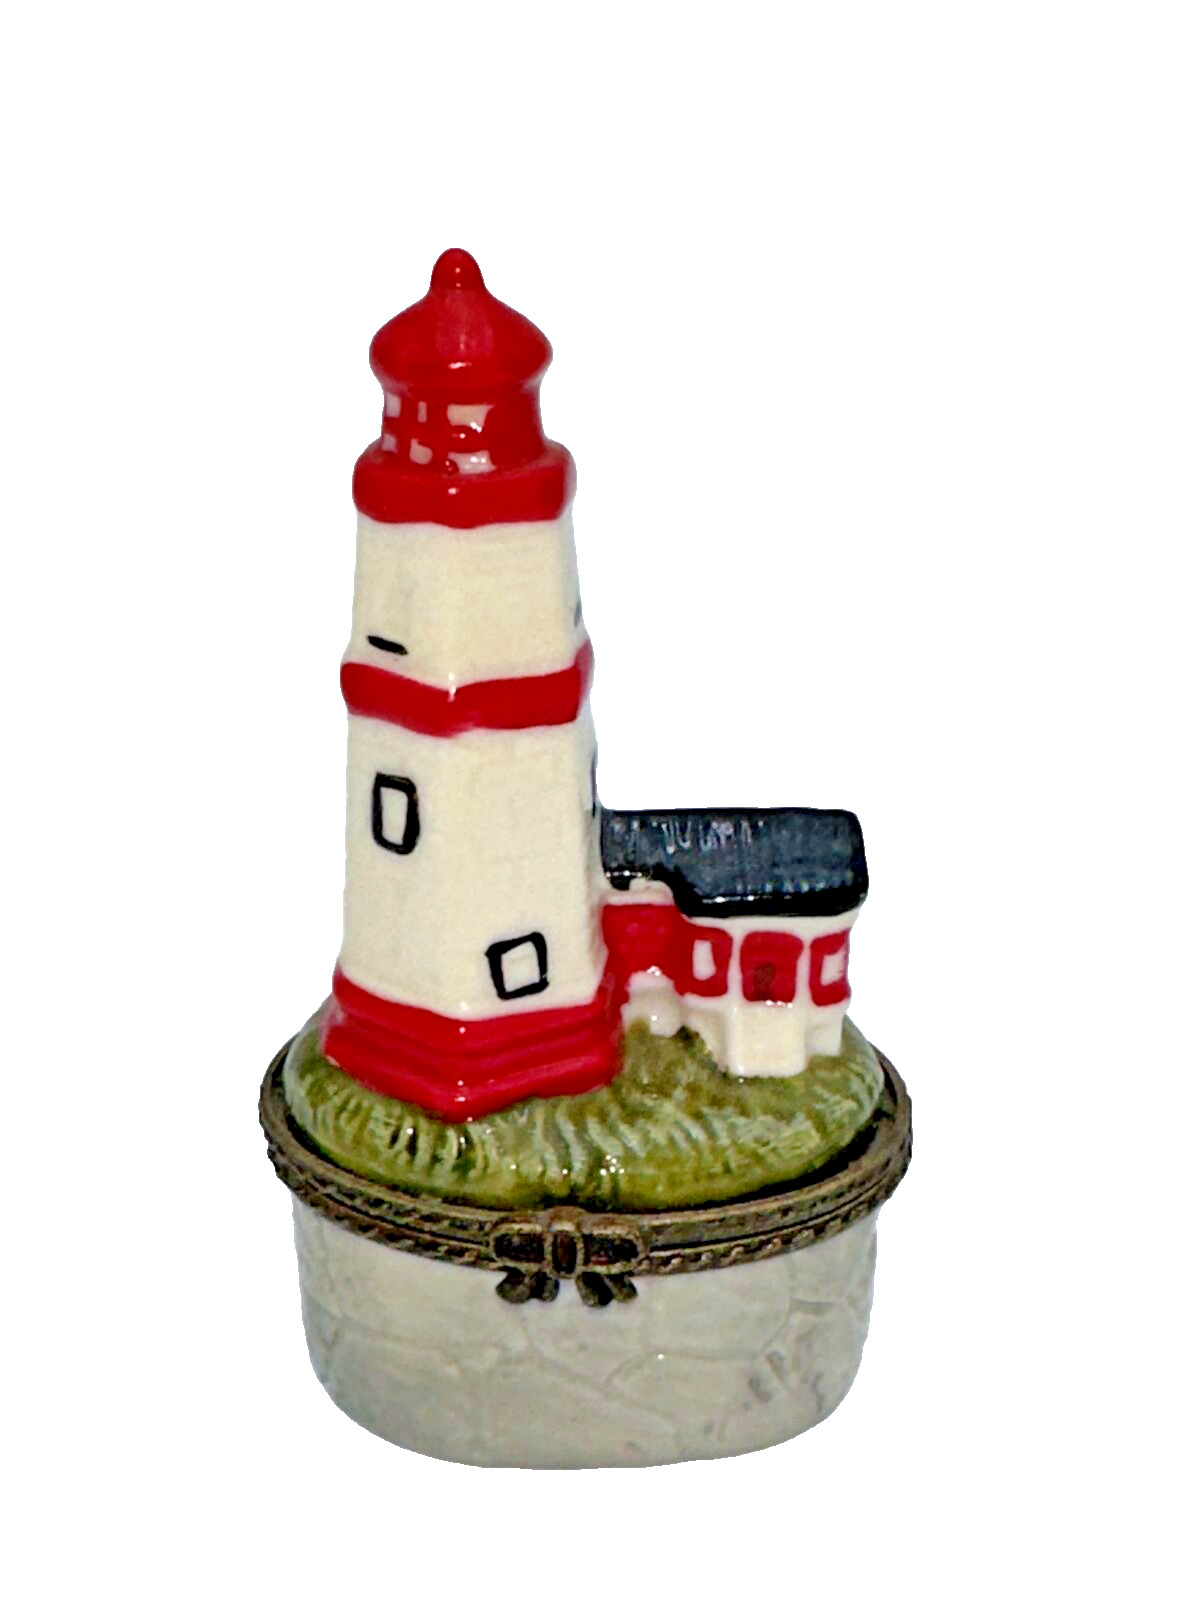 Vintage Trinket Box Ceramic Lighthouse Gloss Finish 3 inches Tall White and Red